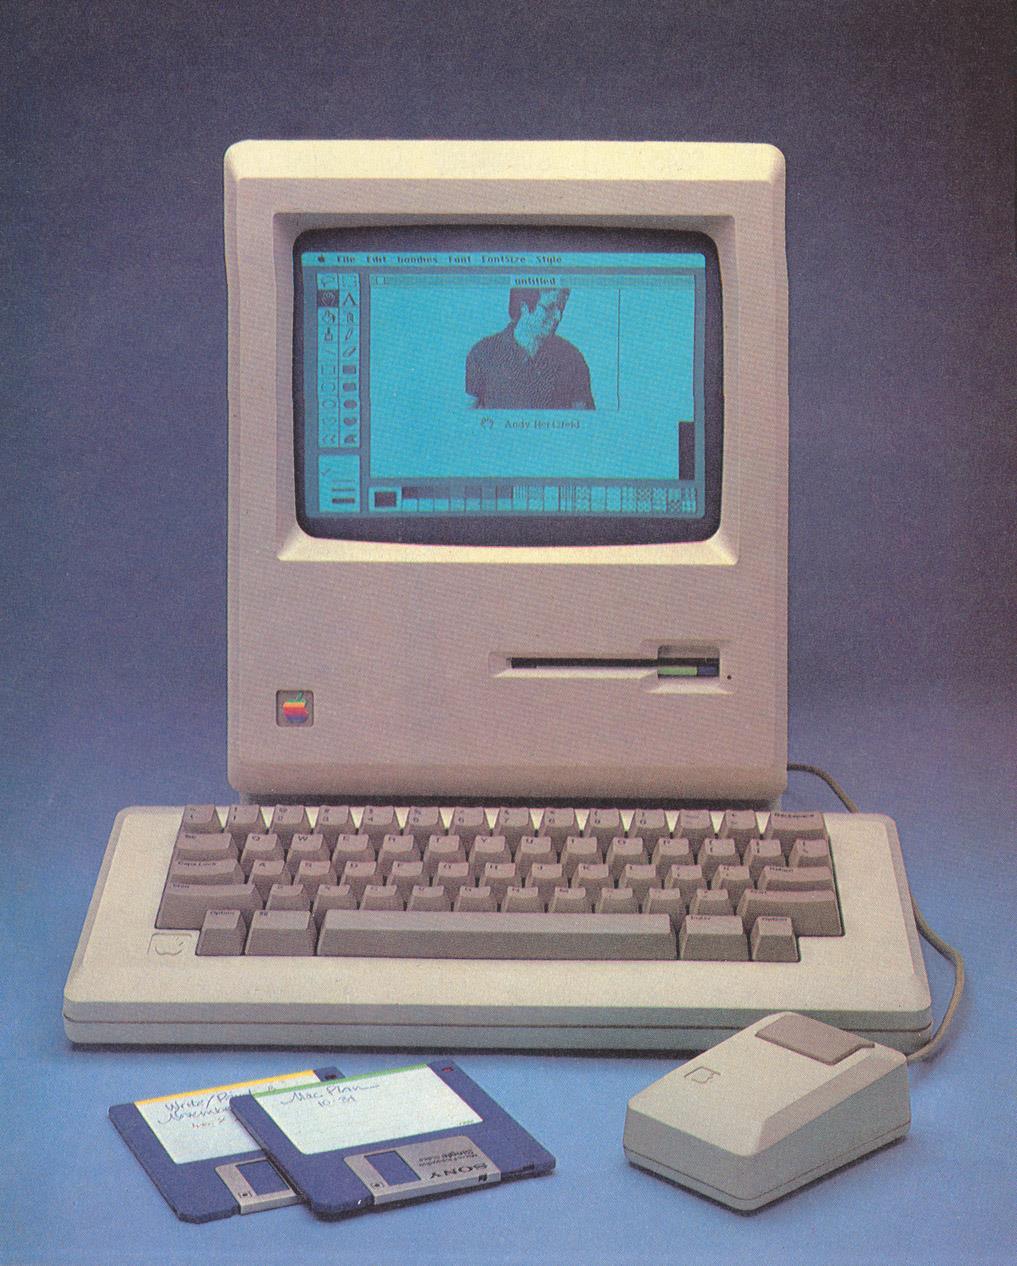 1984 Apple Macintosh 33 Apple introduces the first successful consumer computer with a WIMP user interface (Windows Icons